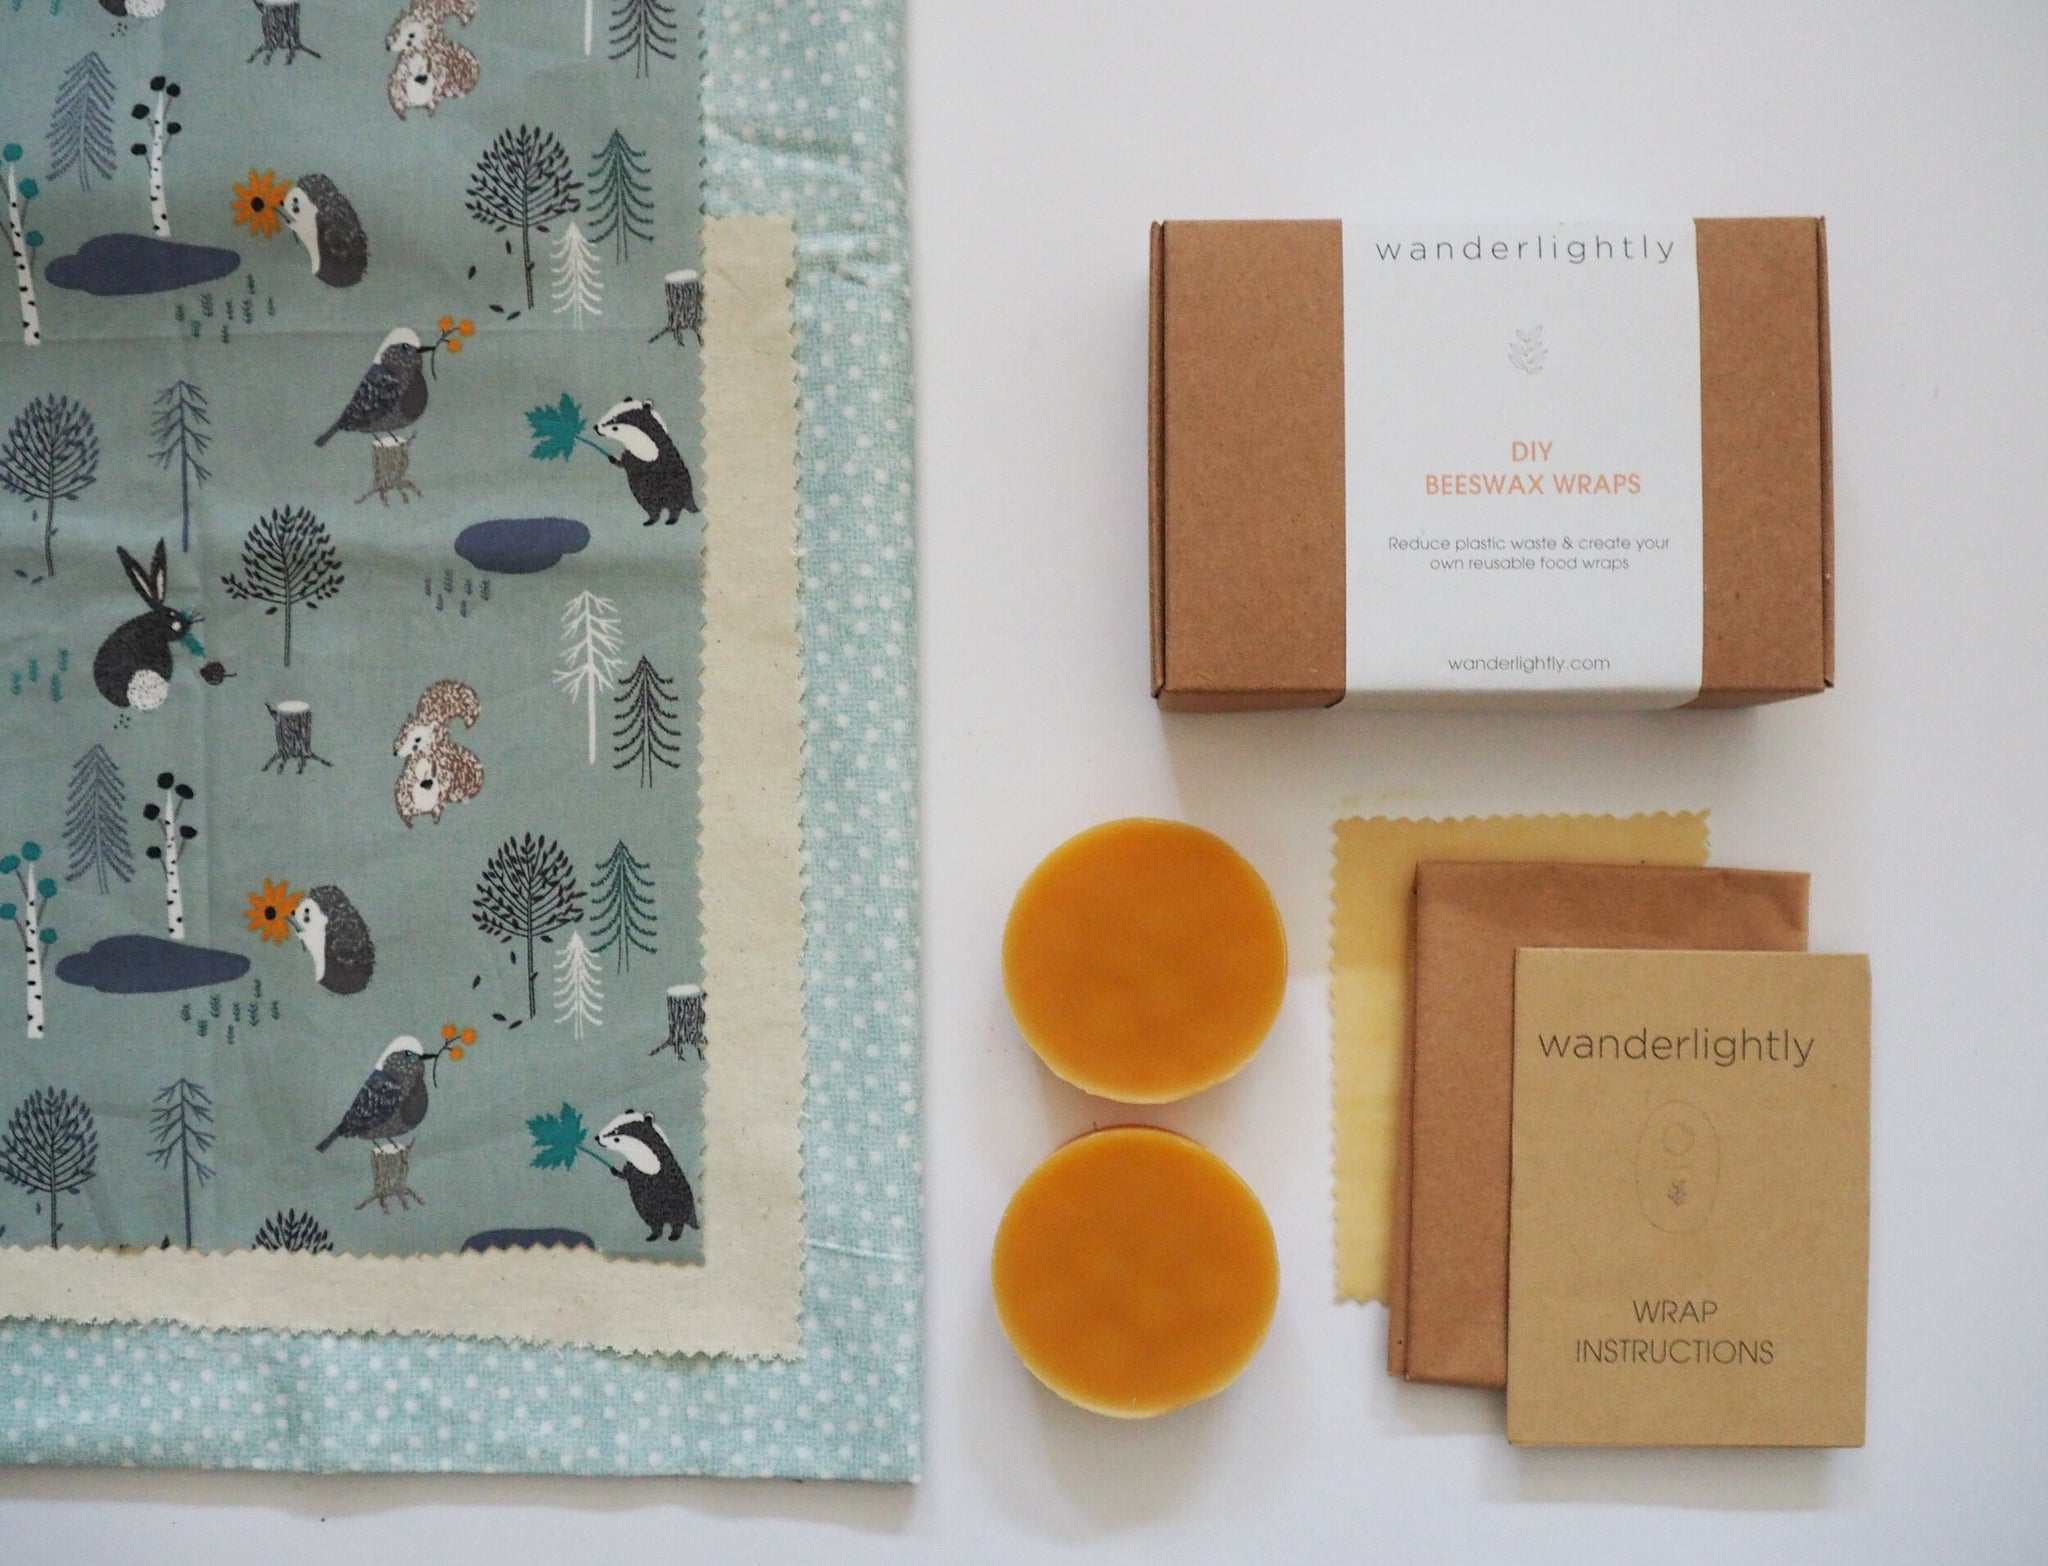 Deluxe beeswax wrap kit